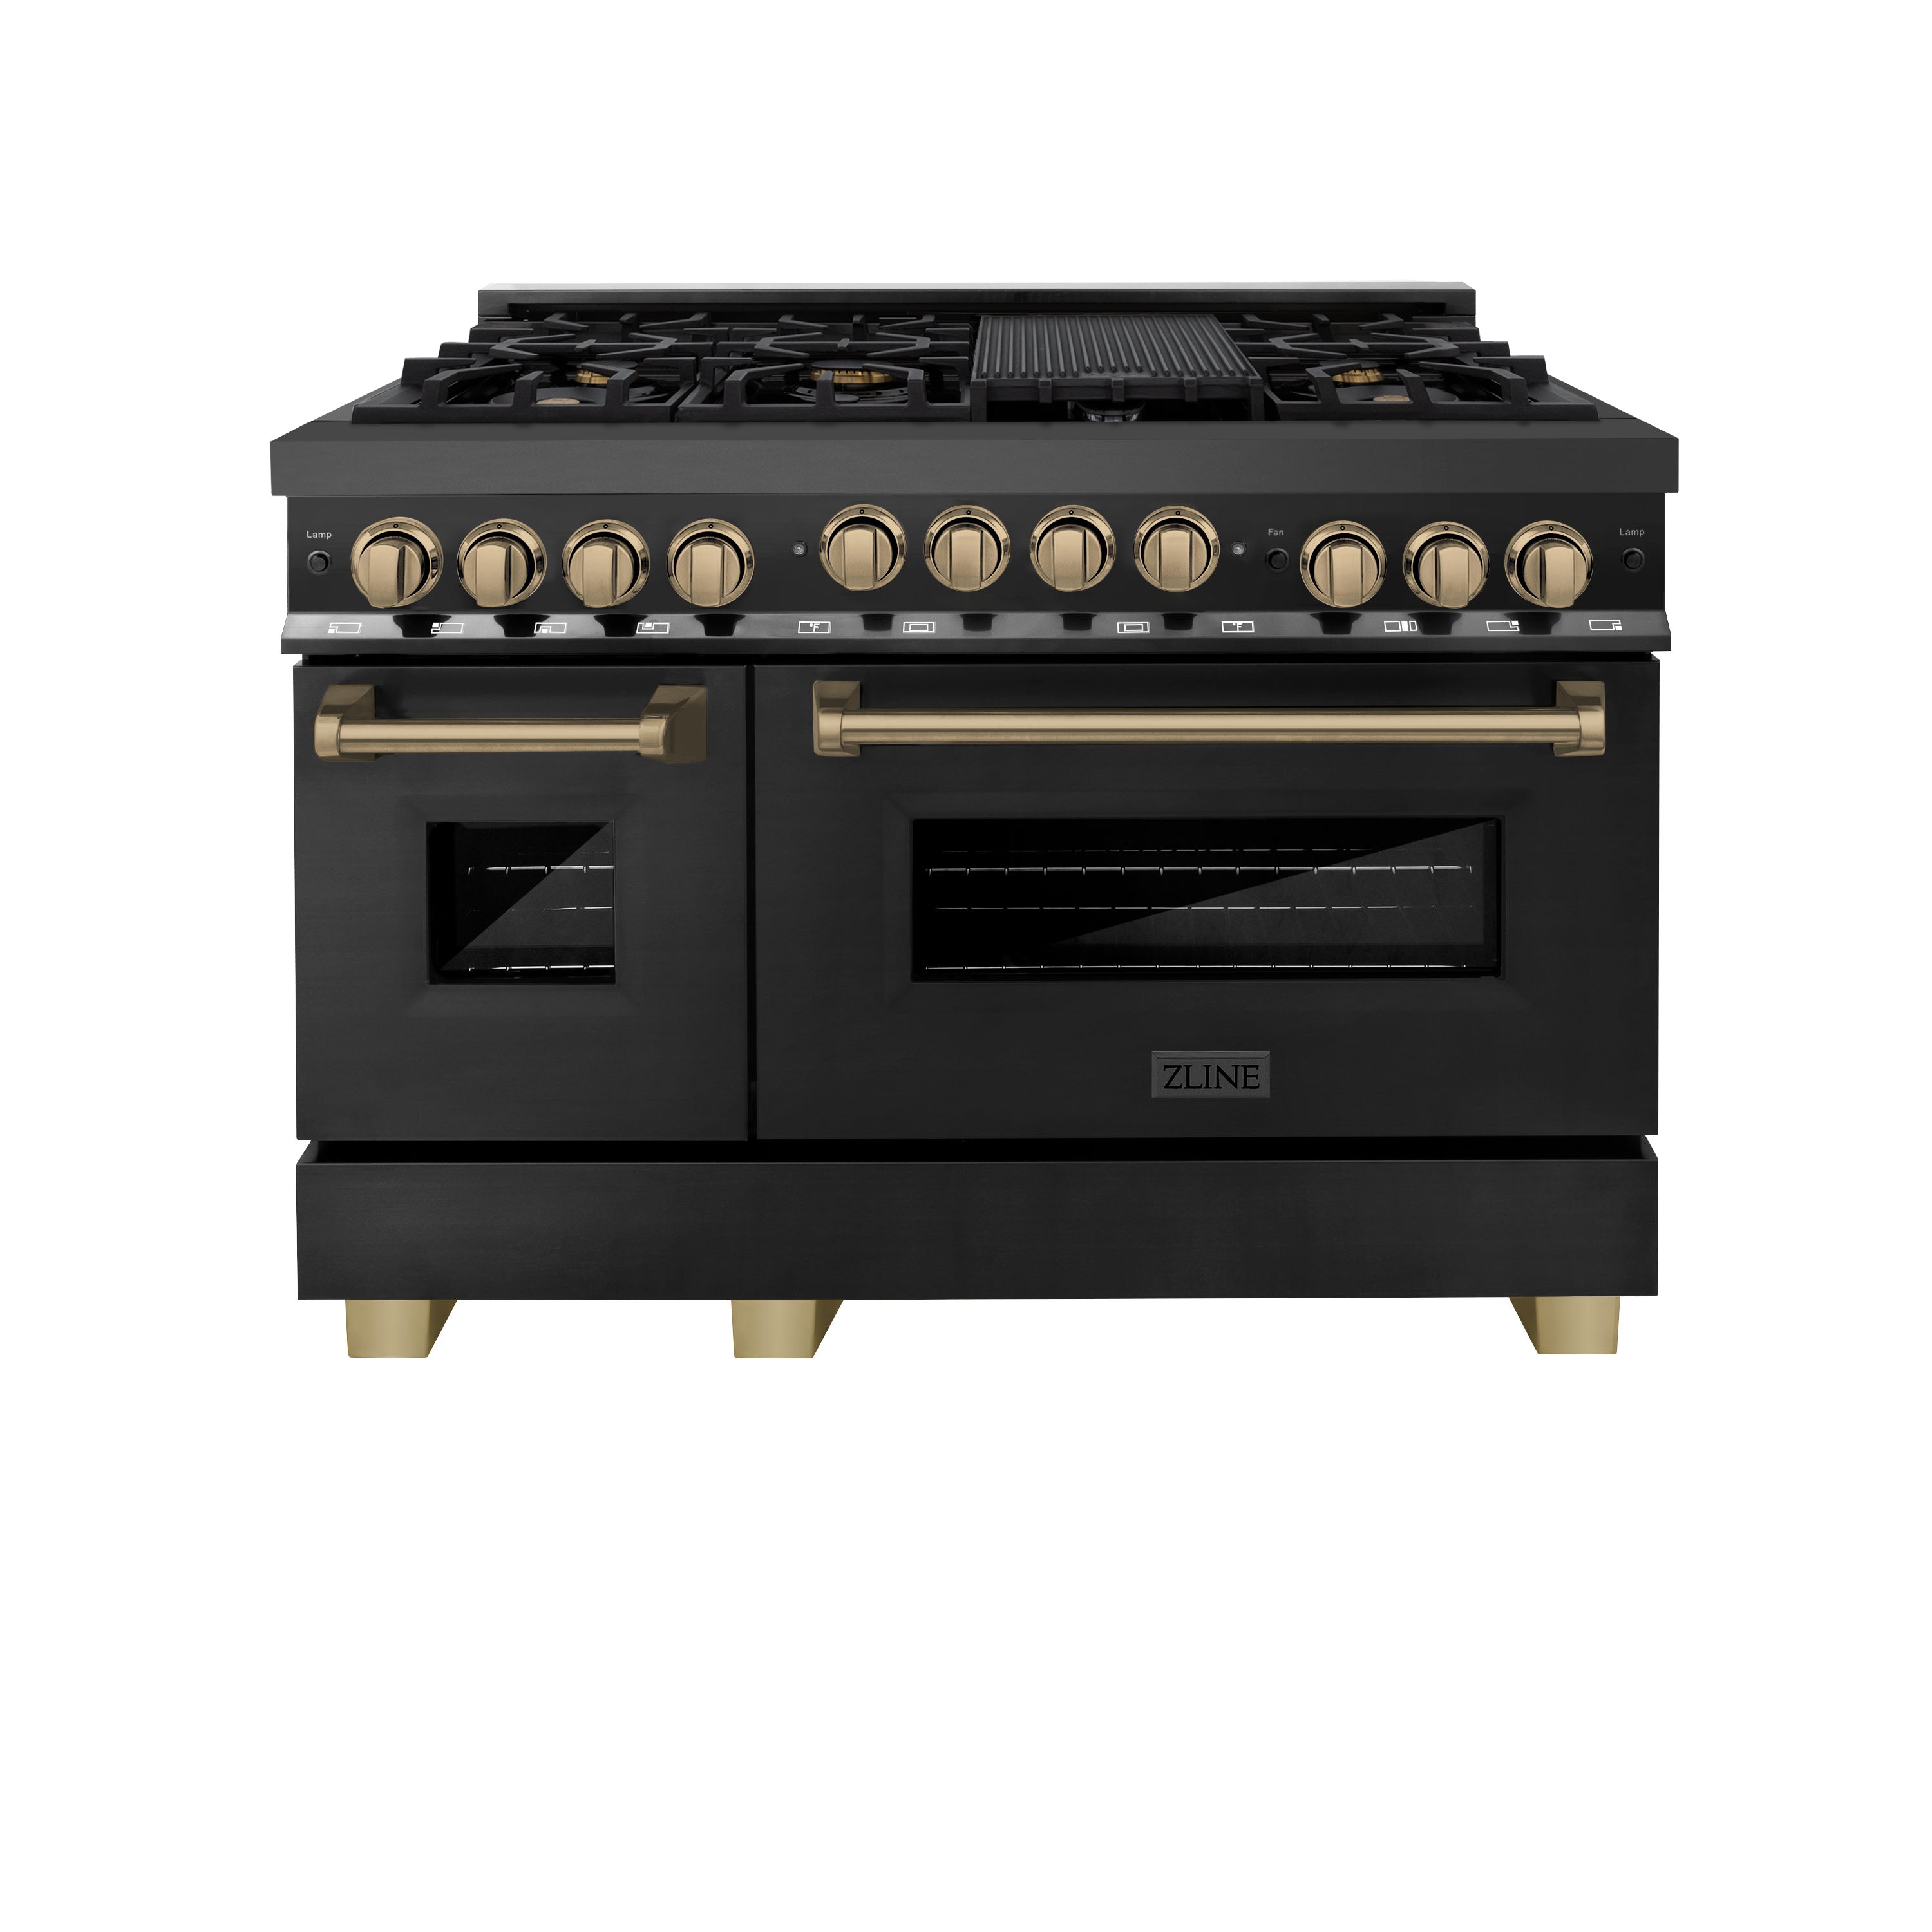 ZLINE Autograph Edition 48 in. 6.0 cu. ft. Range with Gas Stove and Gas Oven in Black Stainless Steel with Accents (RGBZ-48)